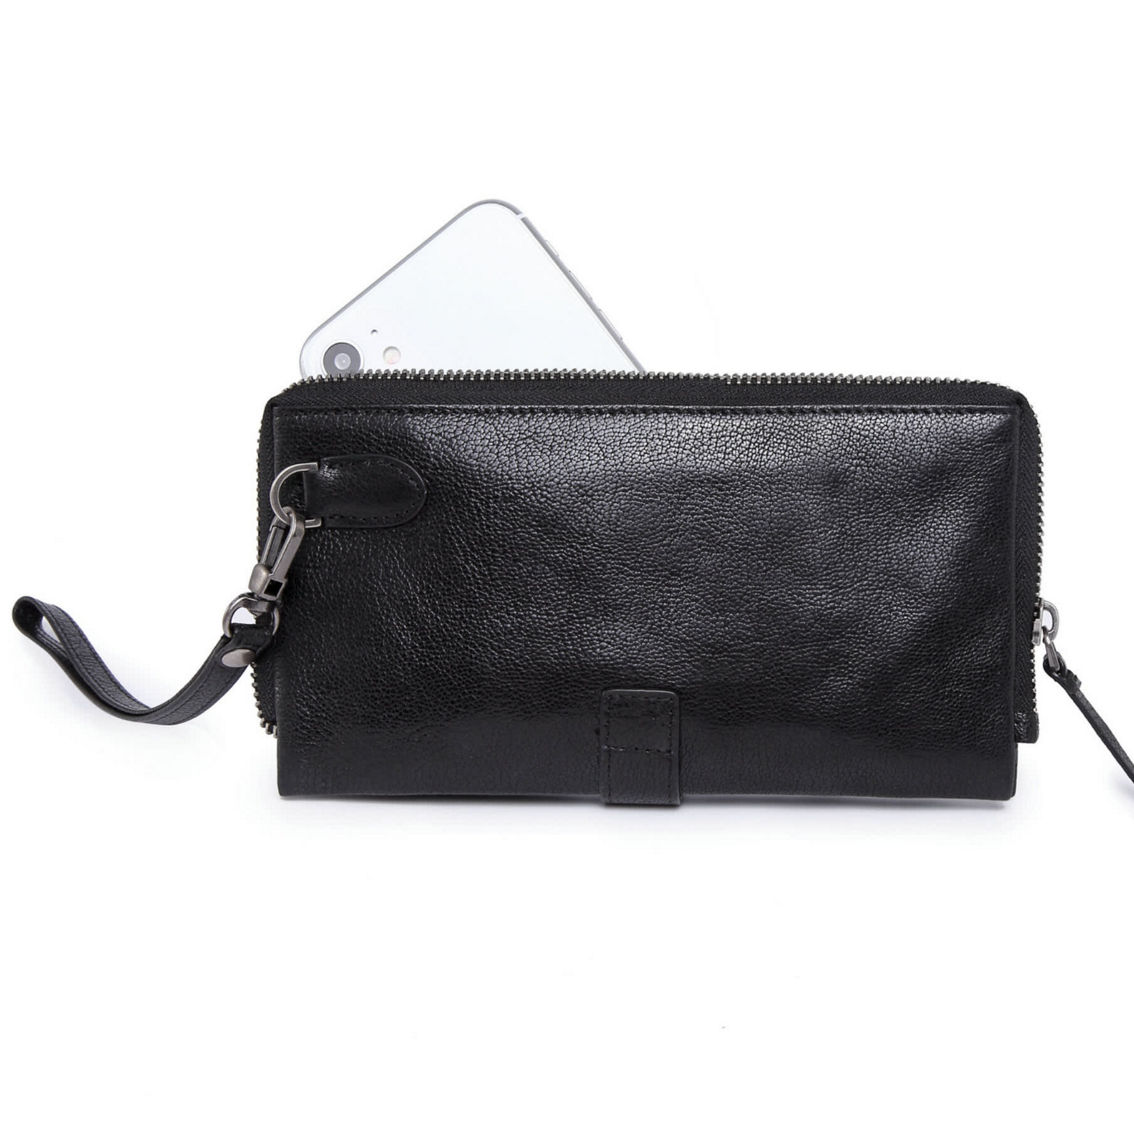 Old Trend Snapper Leather Clutch - Image 4 of 5